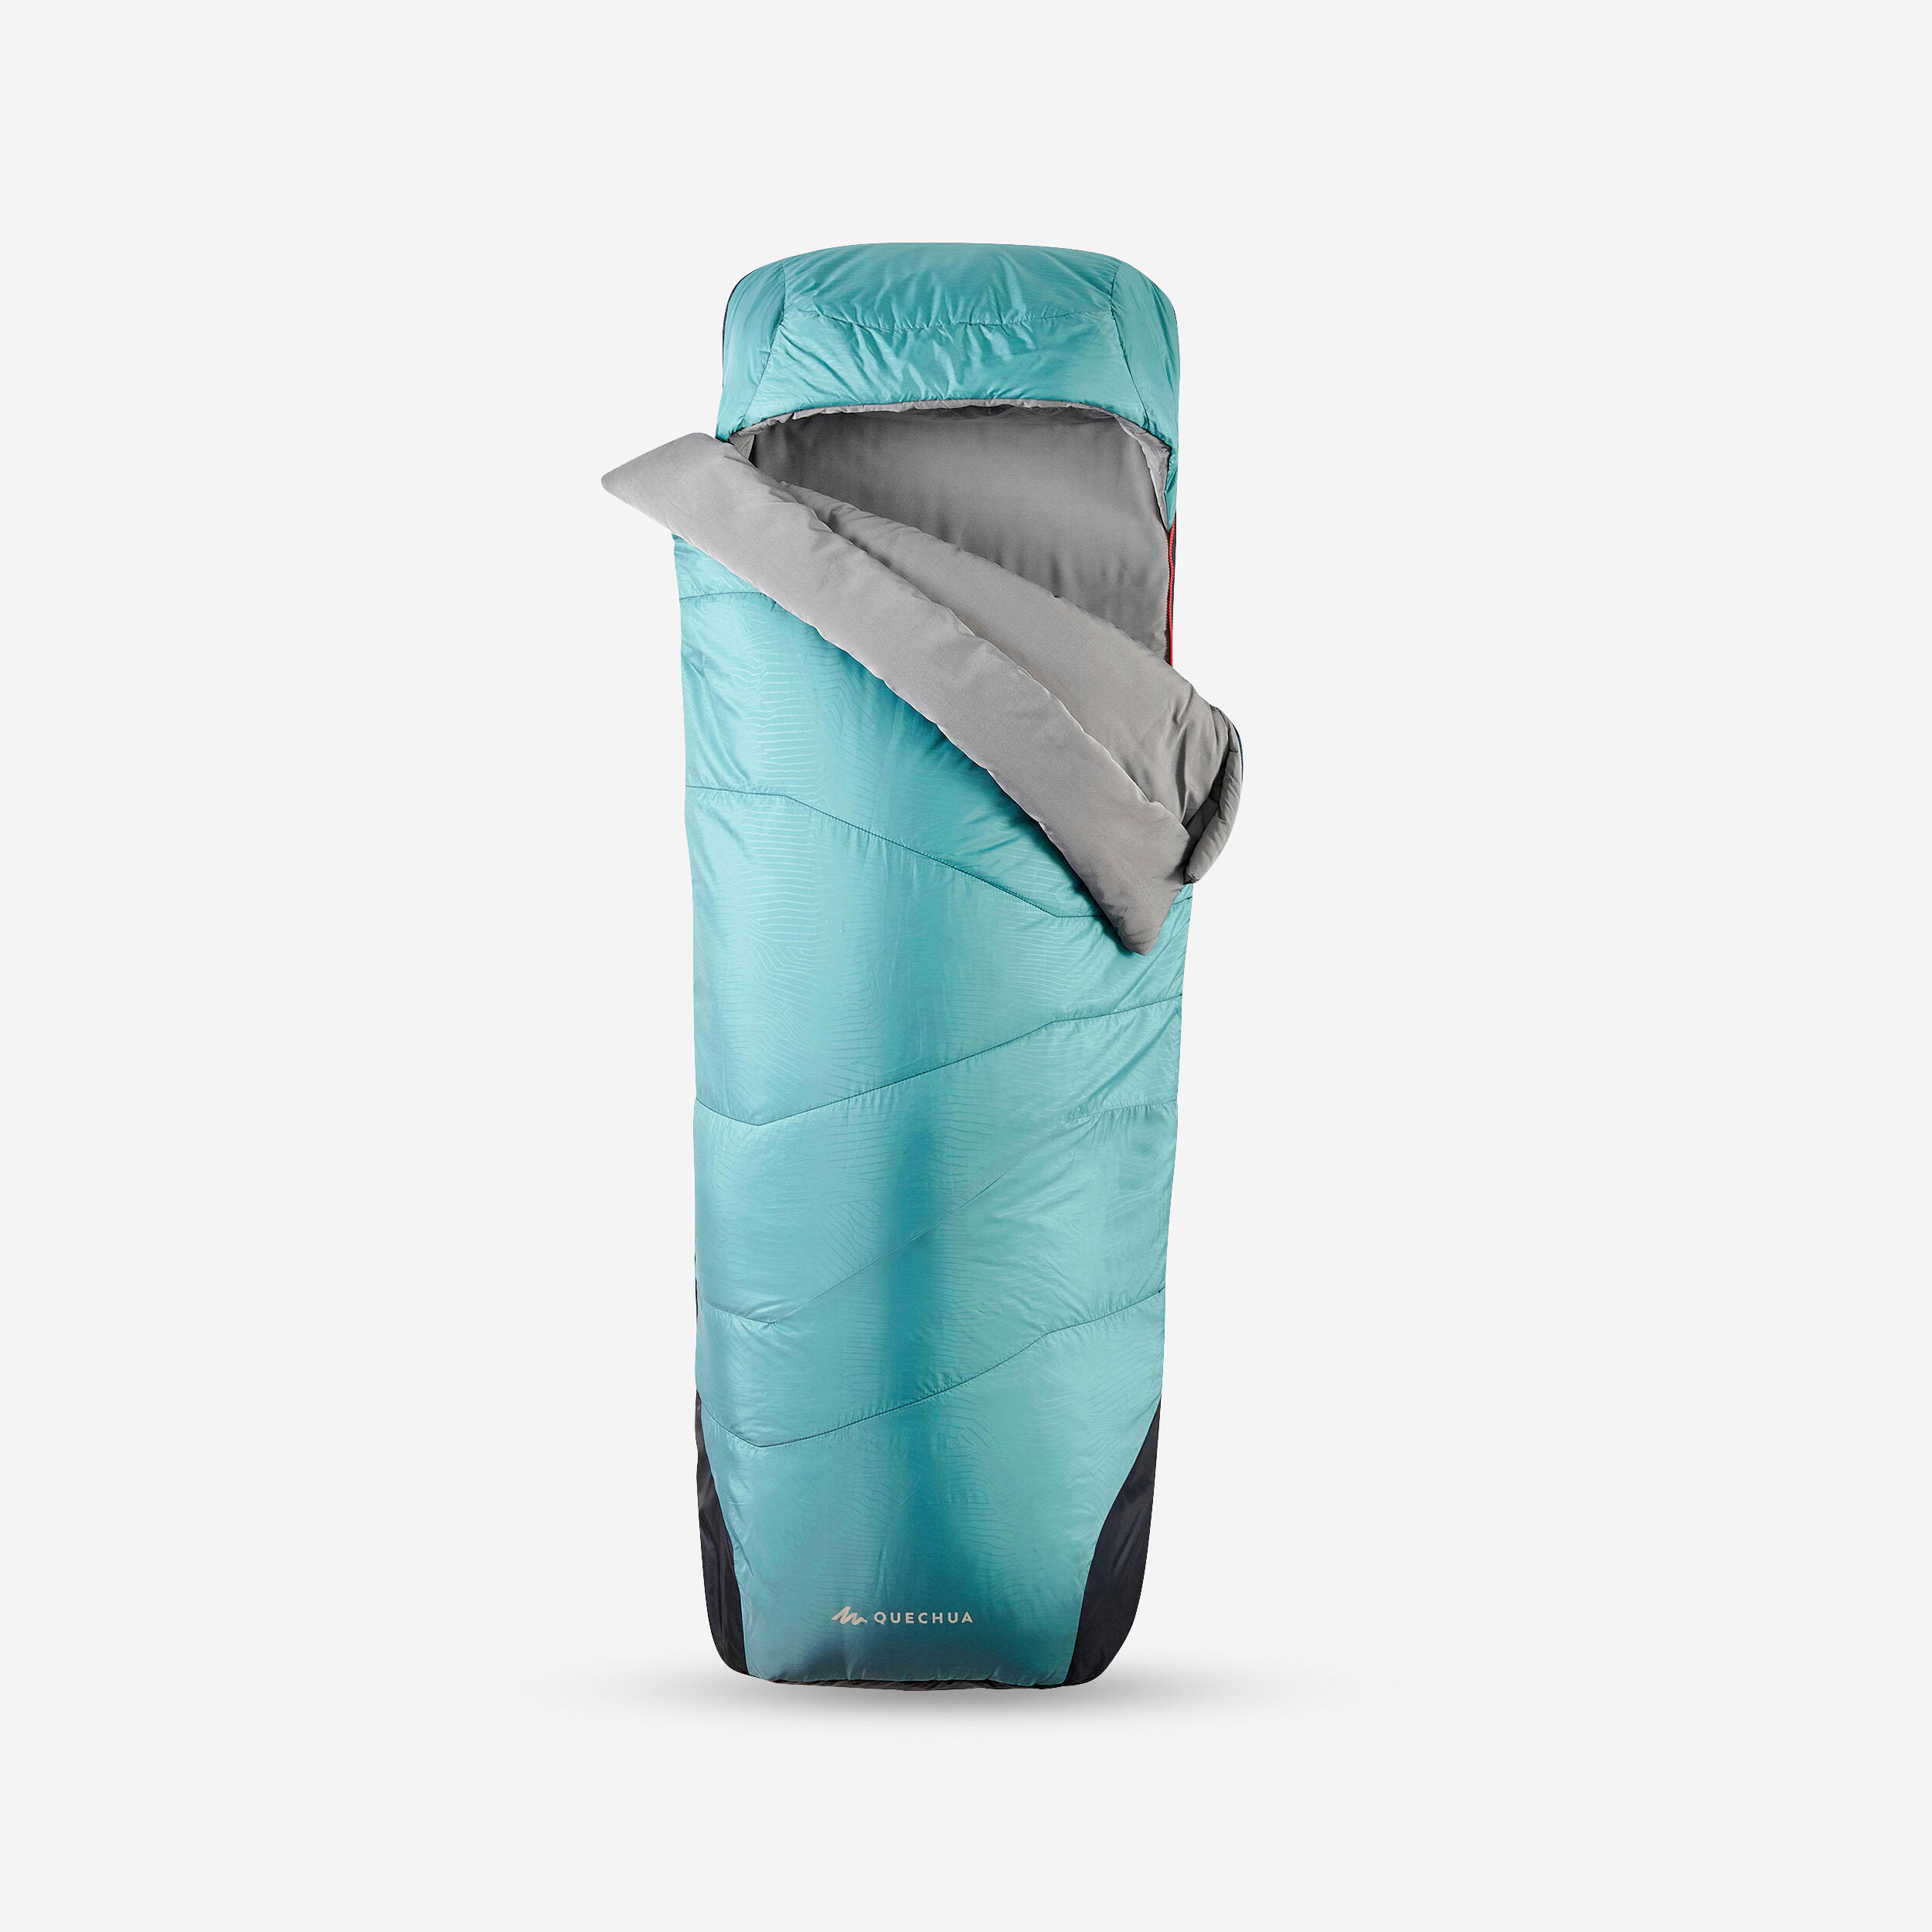 REPLACEMENT SLEEPING BAG FOR SLEEPIN BED MH500 5°C L 1/1